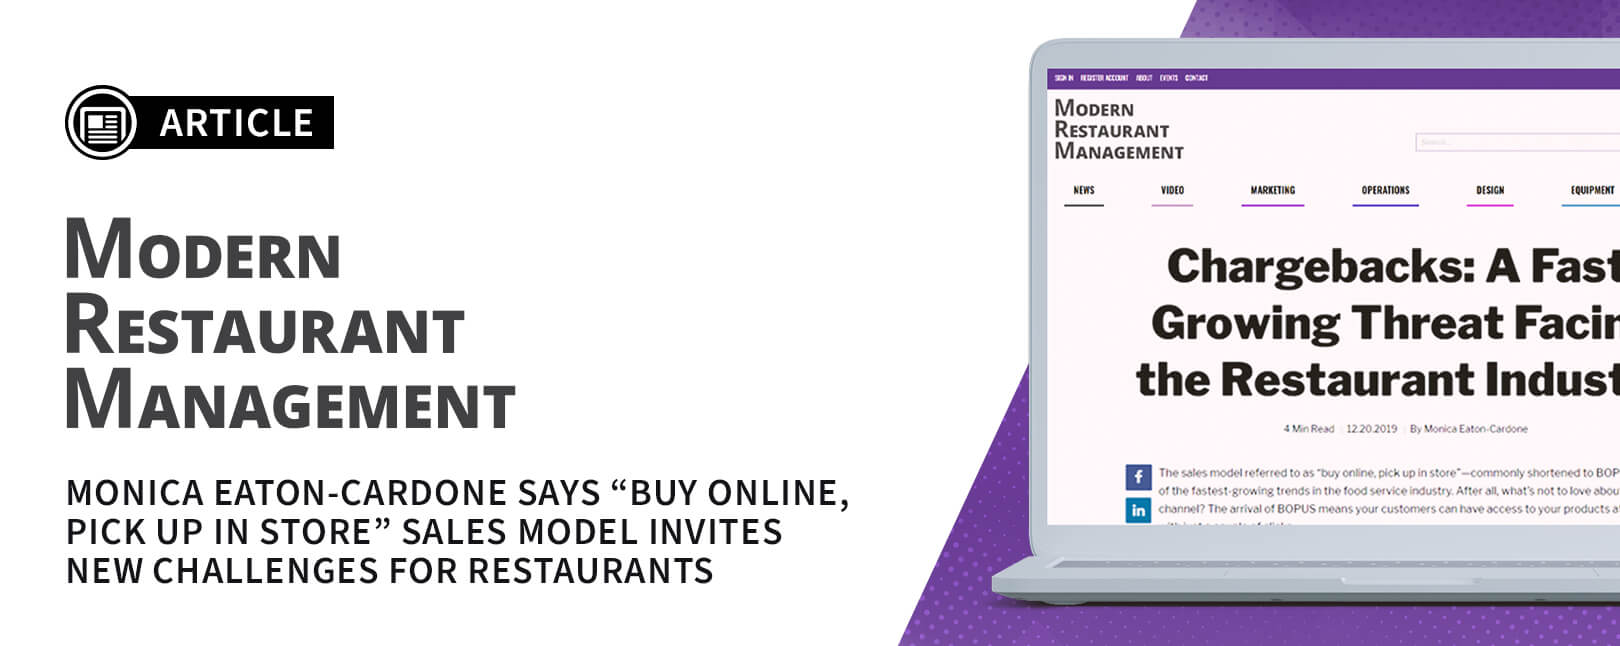 Chargebacks: A Fast-Growing Threat Facing the Restaurant Industry